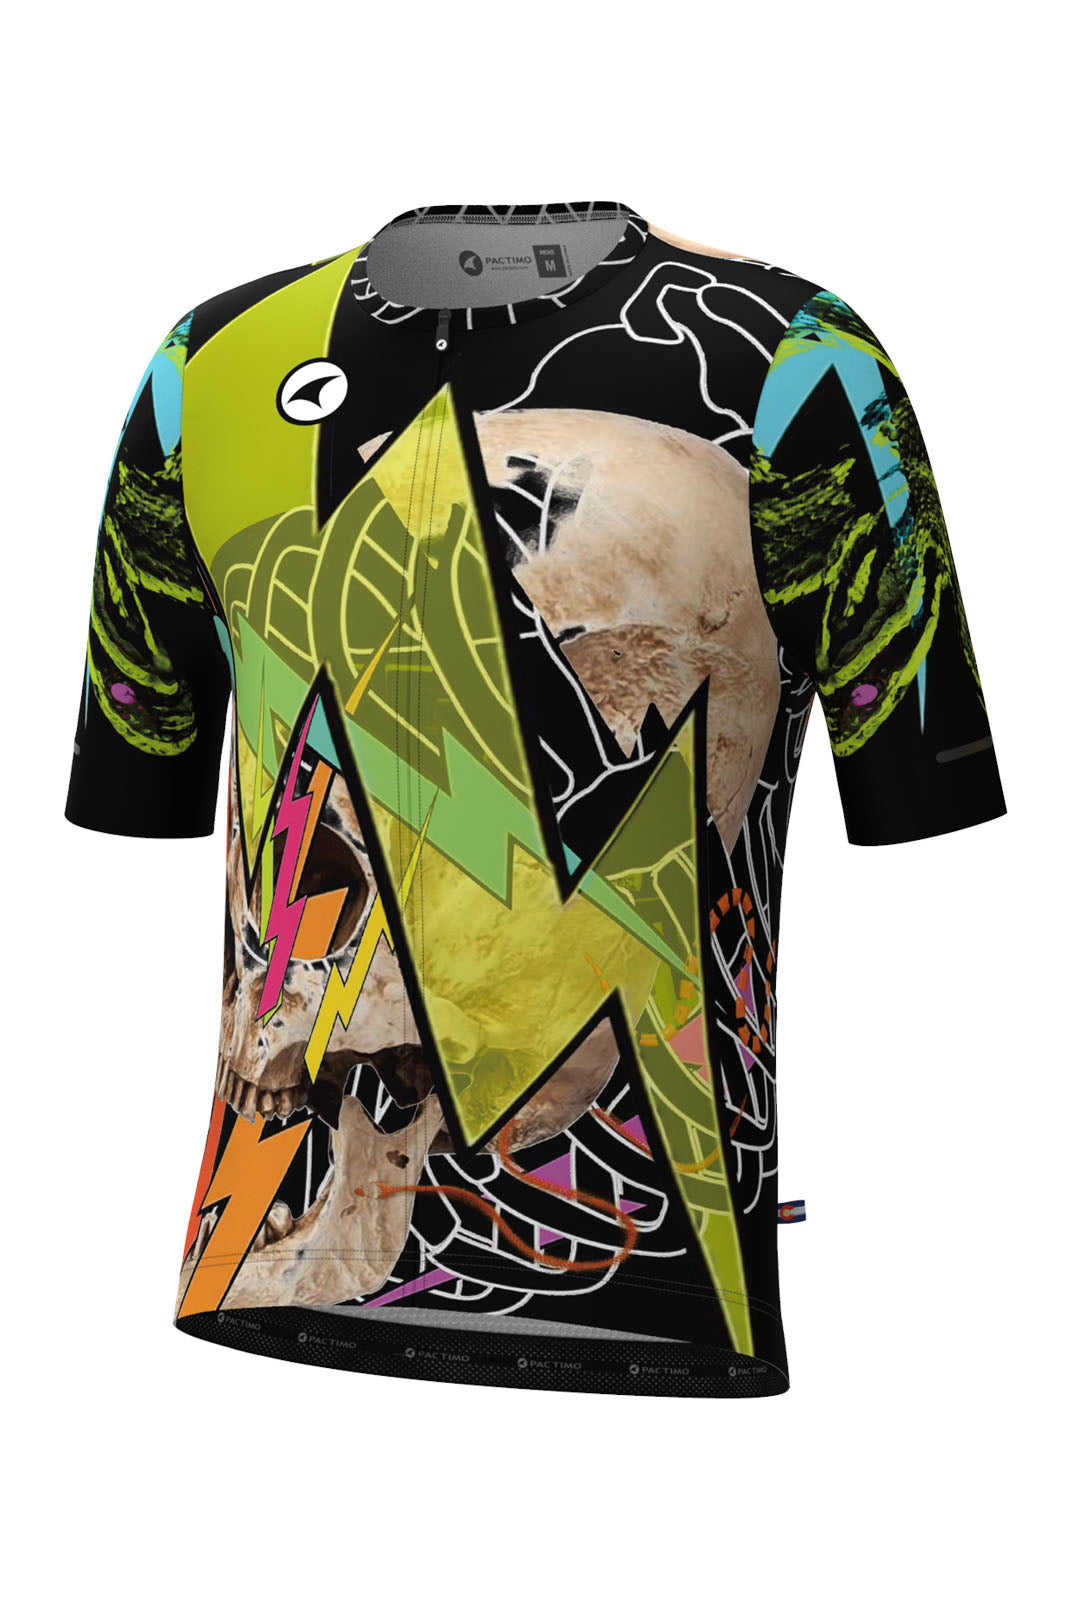 Men's Unique Aero Cycling Jersey - Best Served Cold Black Front View